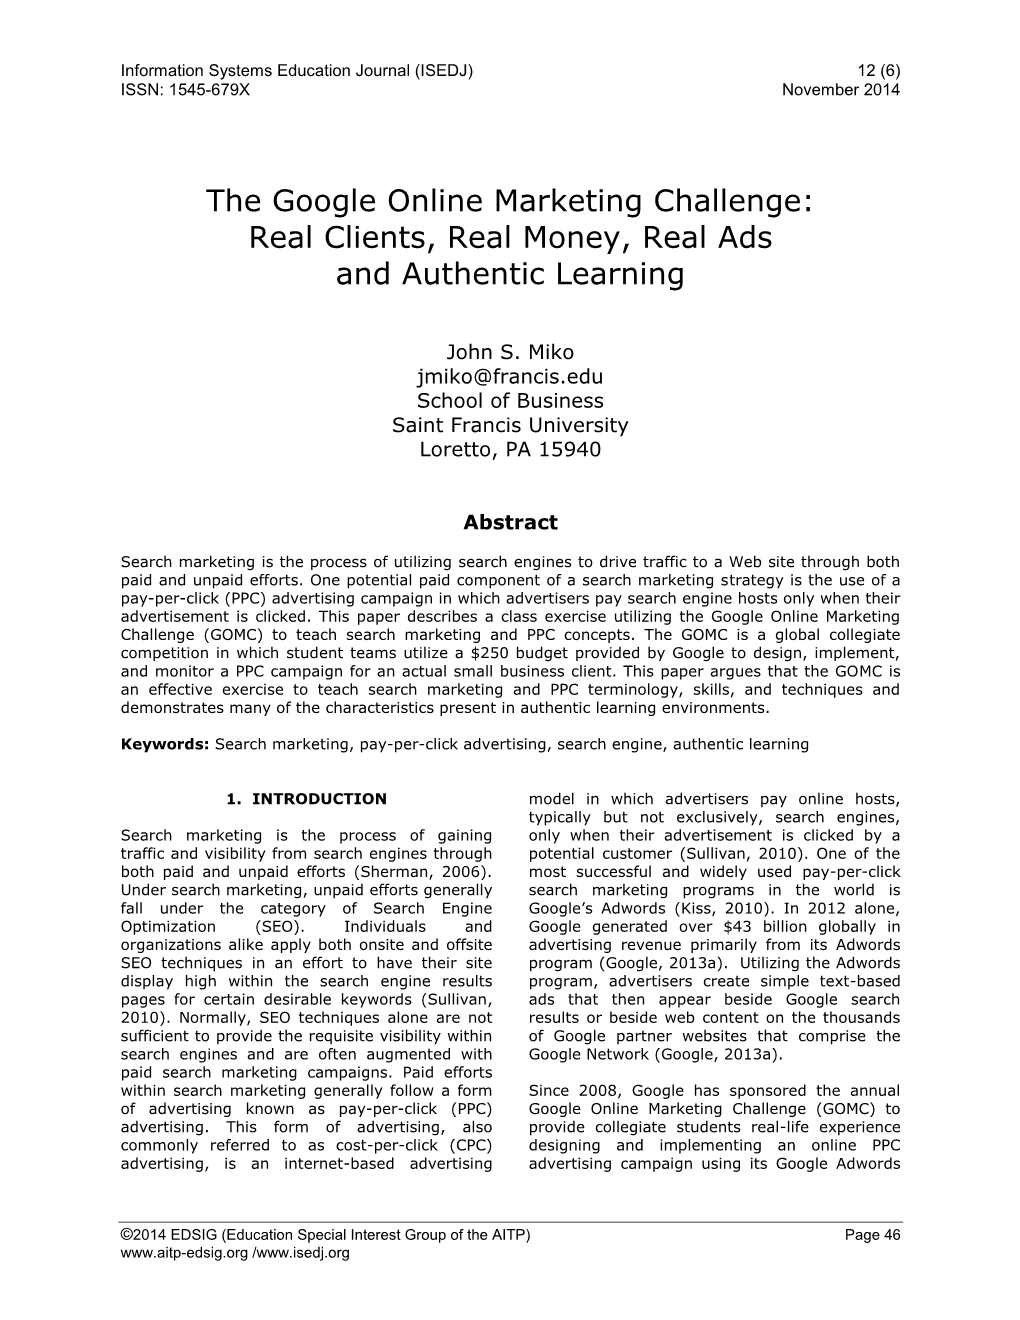 The Google Online Marketing Challenge: Real Clients, Real Money, Real Ads and Authentic Learning